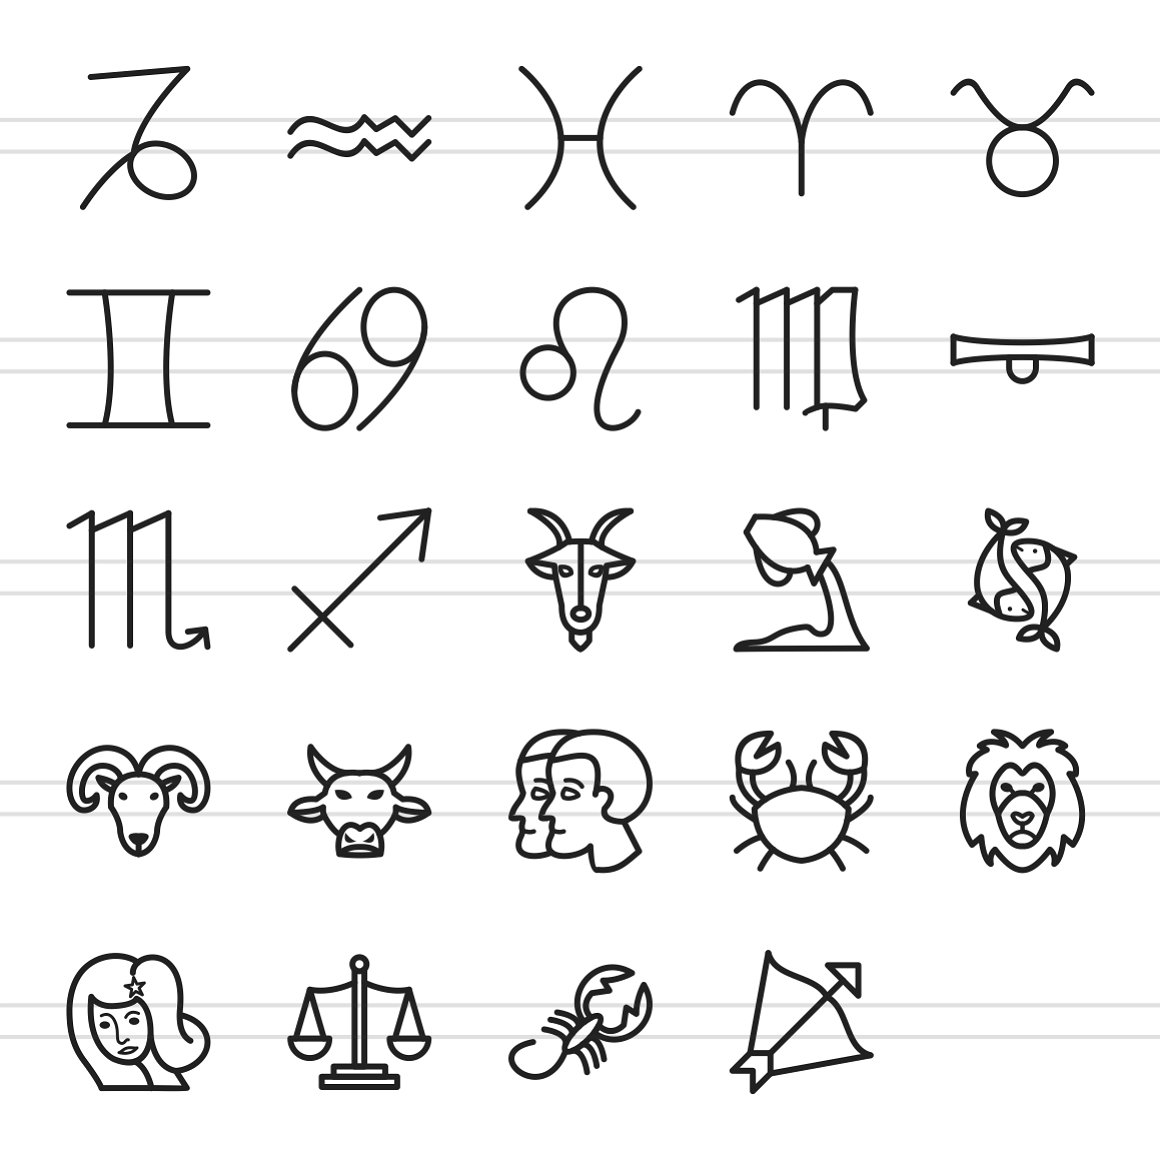 A set of 24 different black zodiac icons on a white background.